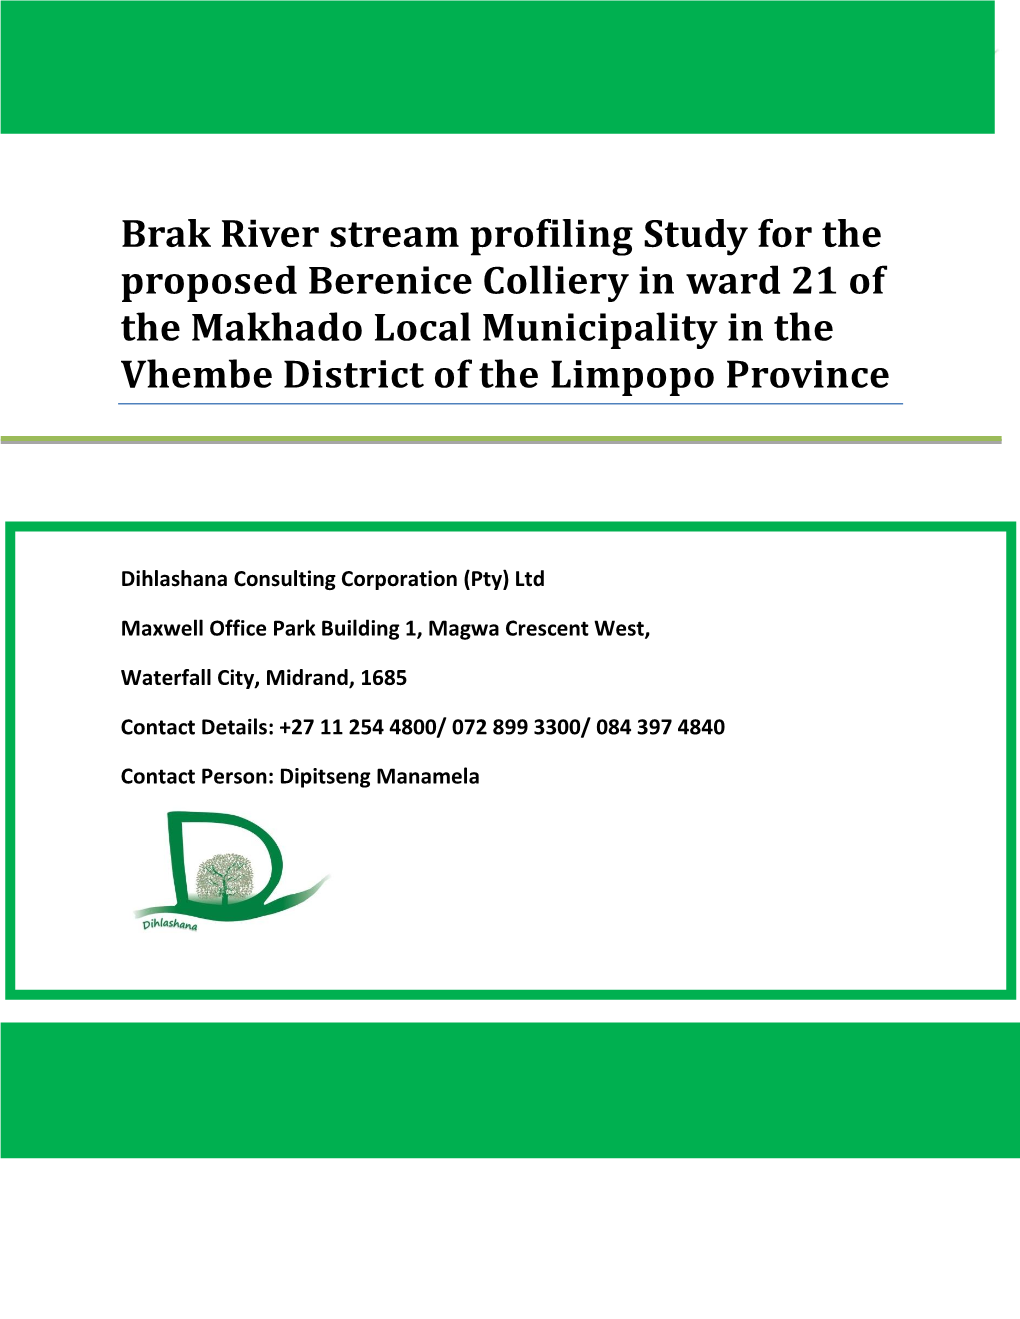 Brak River Stream Profiling Study for the Proposed Berenice Colliery in Limpopo Province